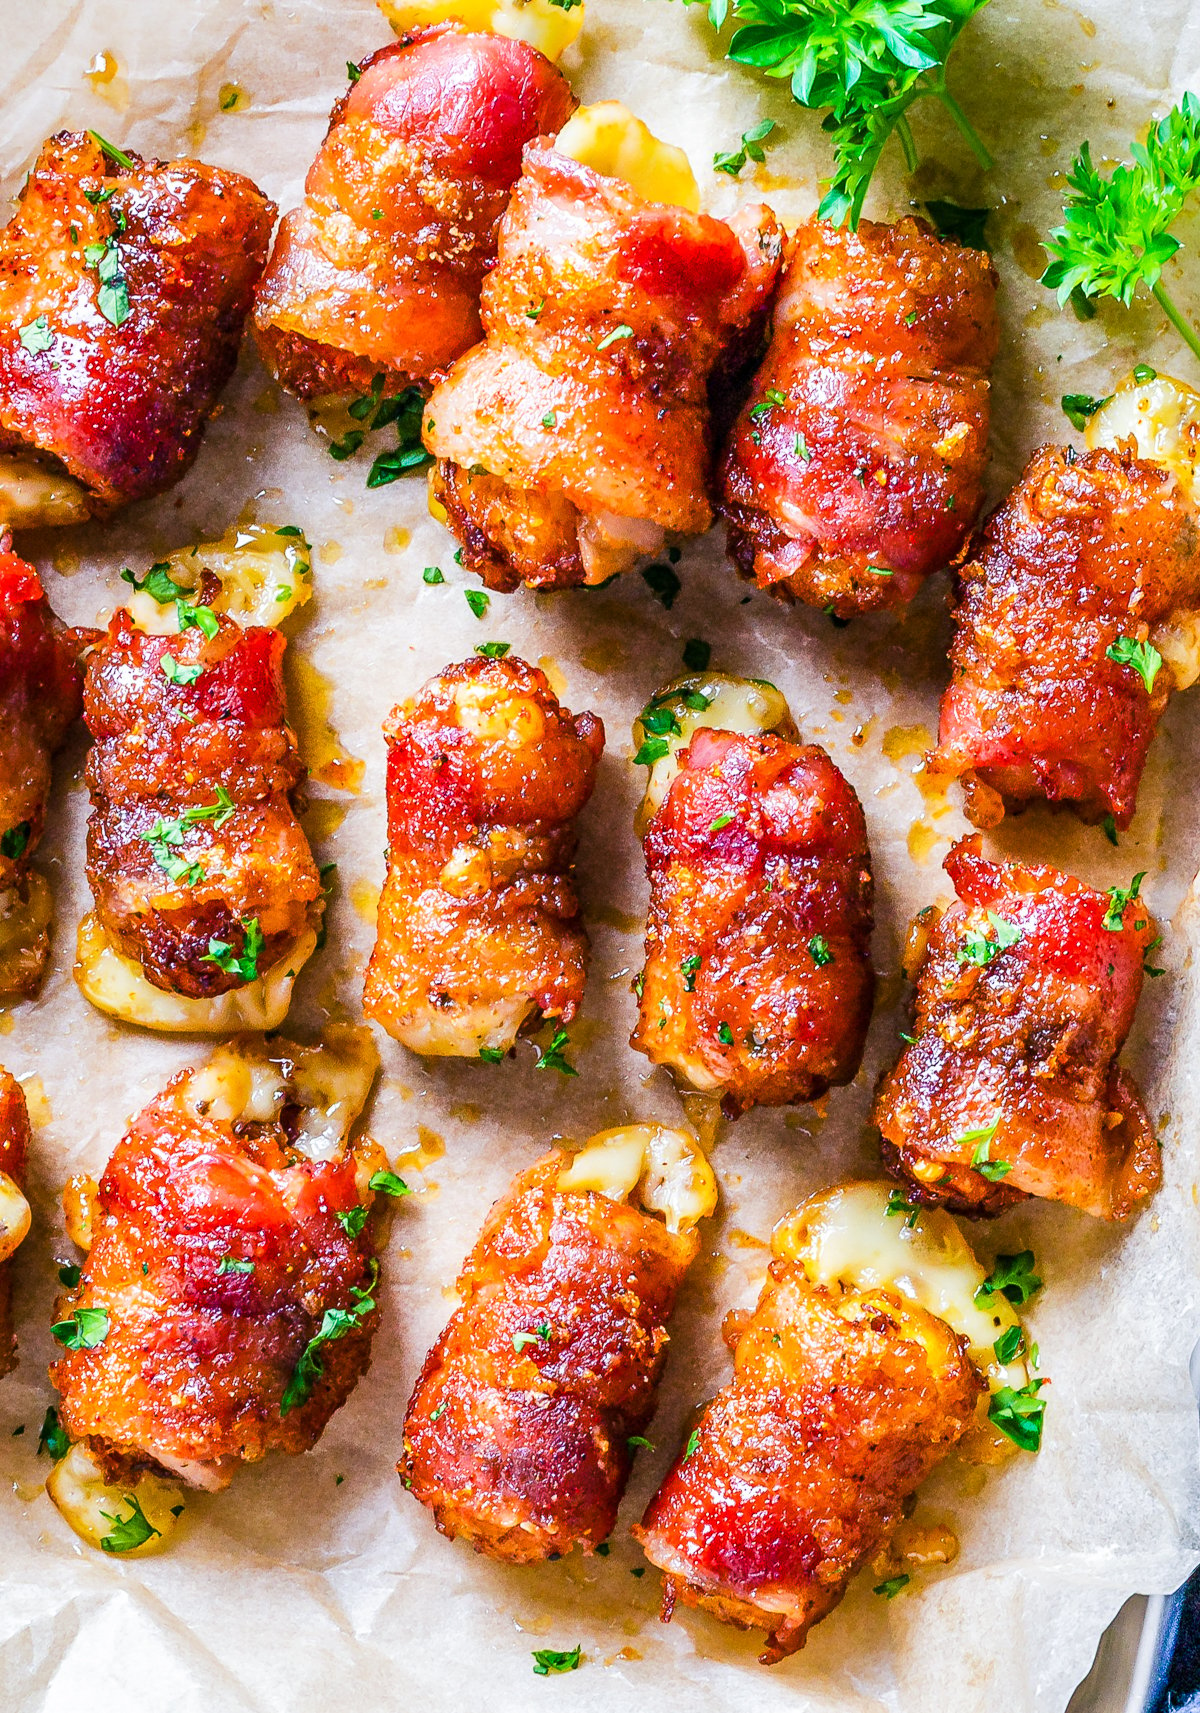 Finished Sweet & Spicy Bacon Bombs overhead on parchment lined tray with parsley.